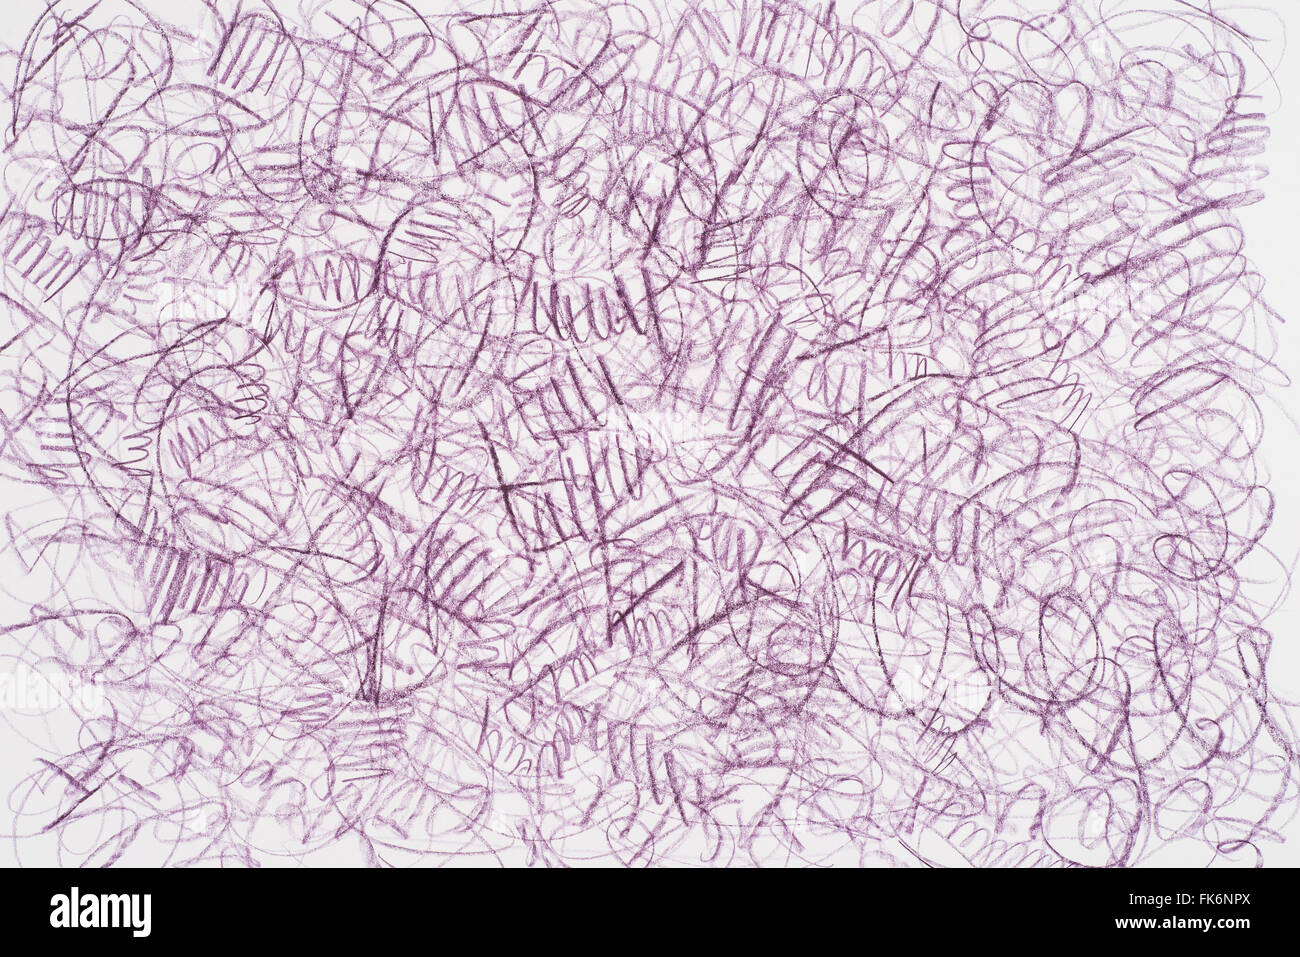 violet crayon doodles on white paper background Stock Photo